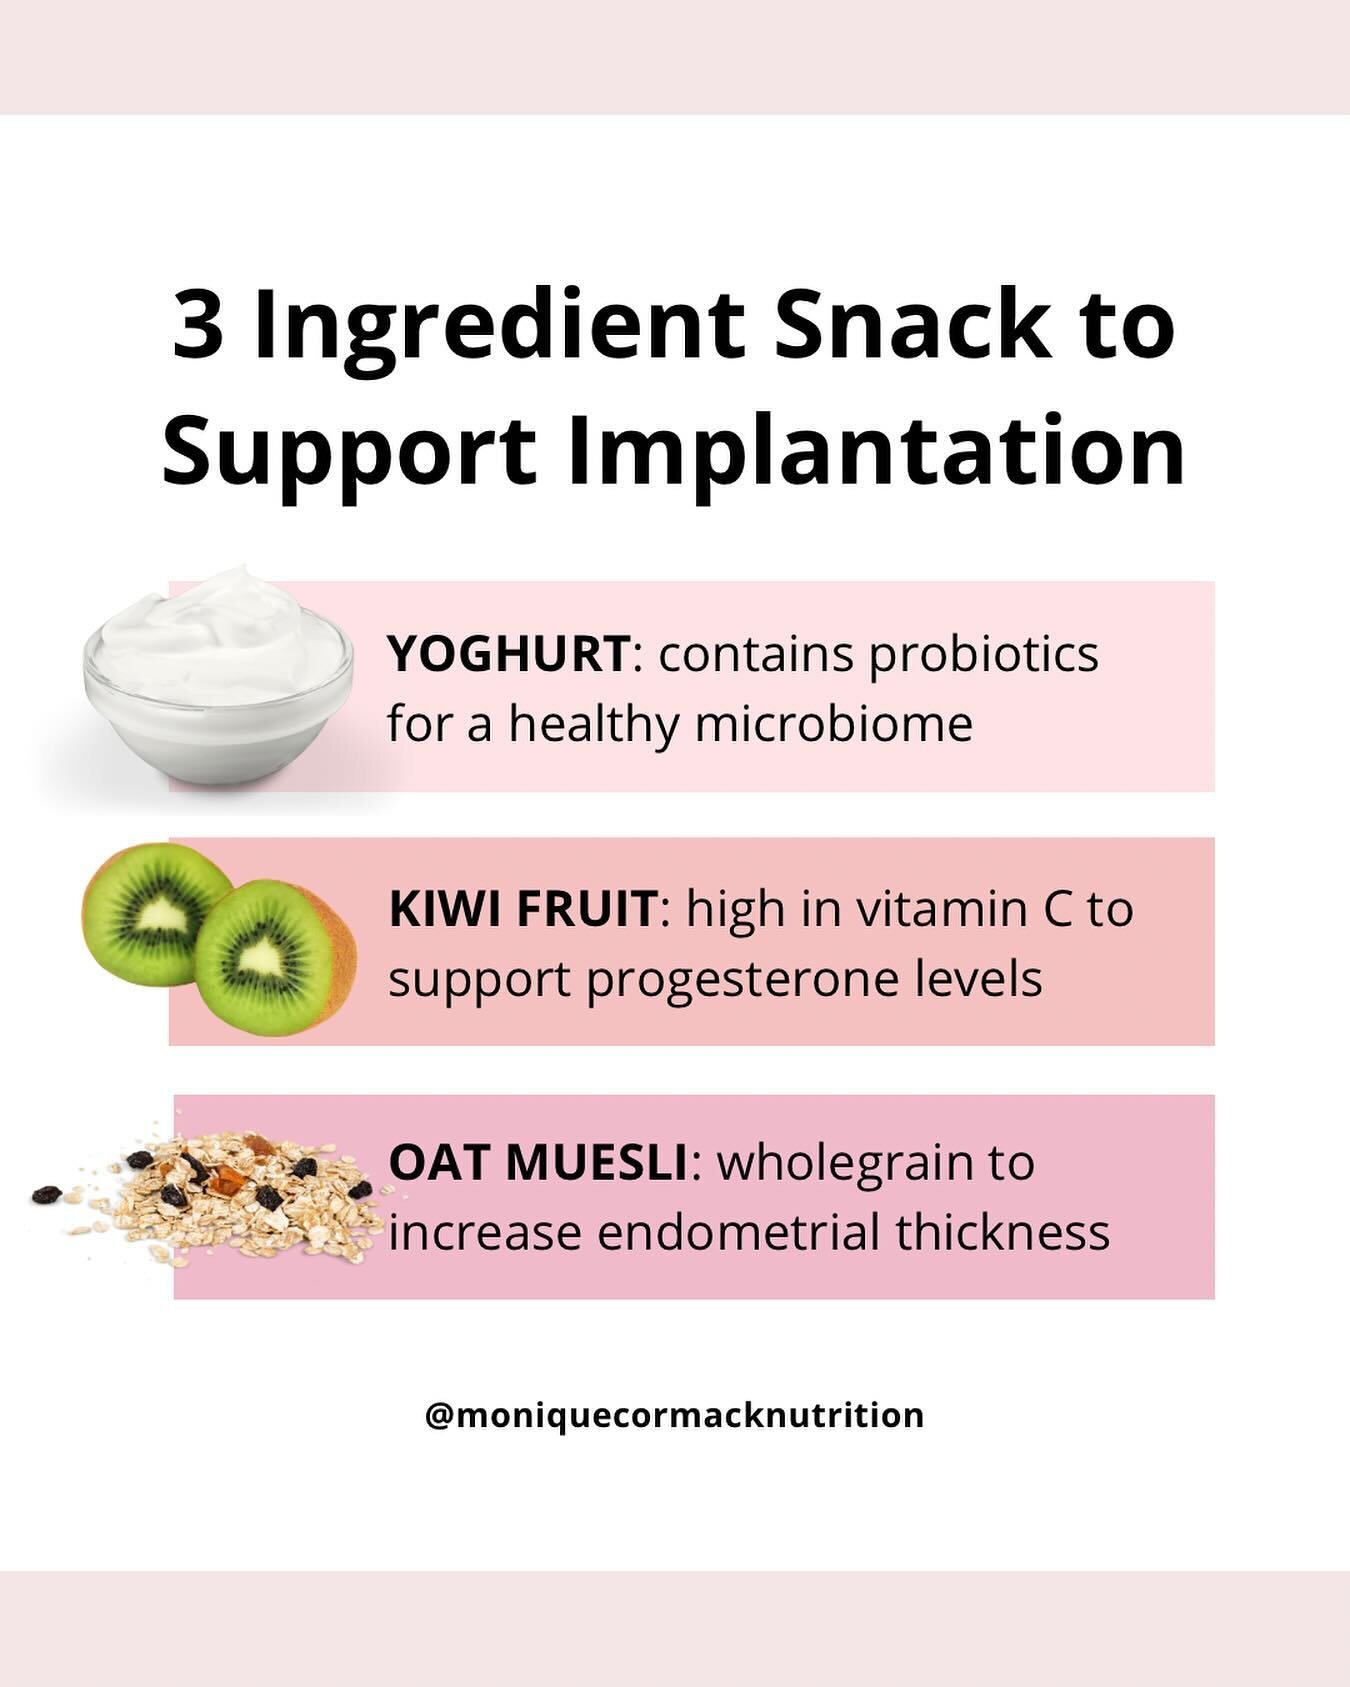 EASY SNACK TO SUPPORT IMPLANTATION 🎯⁣
⁣
Save this super simple idea!⁣
⁣
🥣 Yoghurt, a great source of probiotics to support a healthy balanced microbiome. Emerging research suggests the composition of the uterine microbiome may affect implantation.⁣